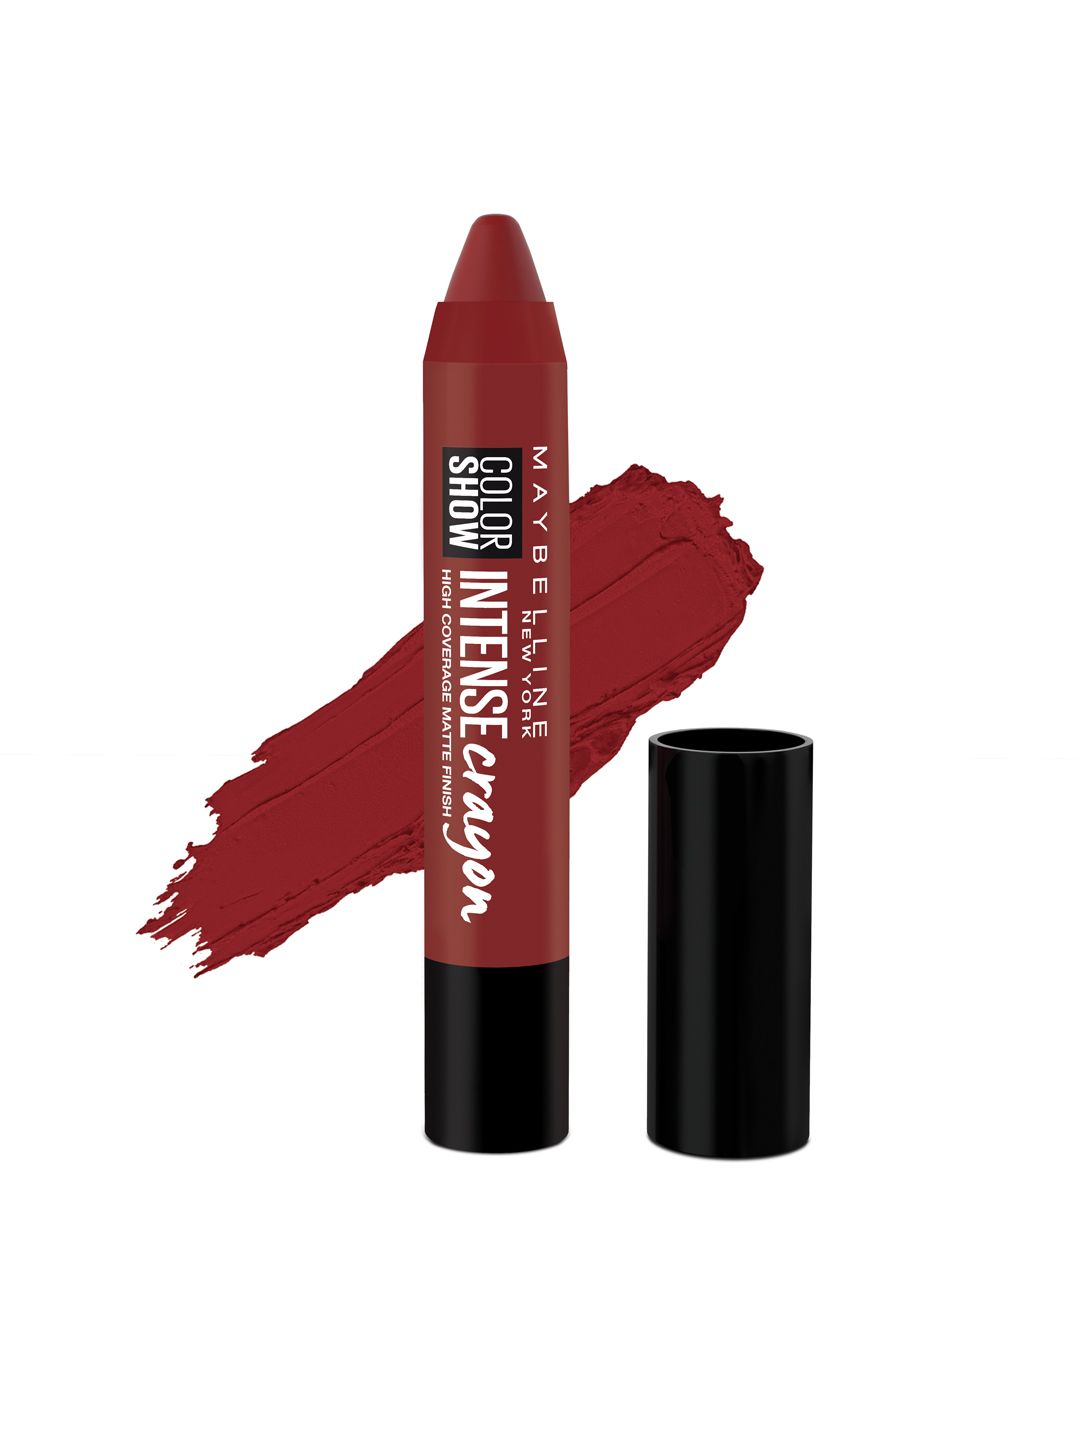 Maybelline New York Color Show Intense Crayon Lipstick - Magnetic Maroon Price in India